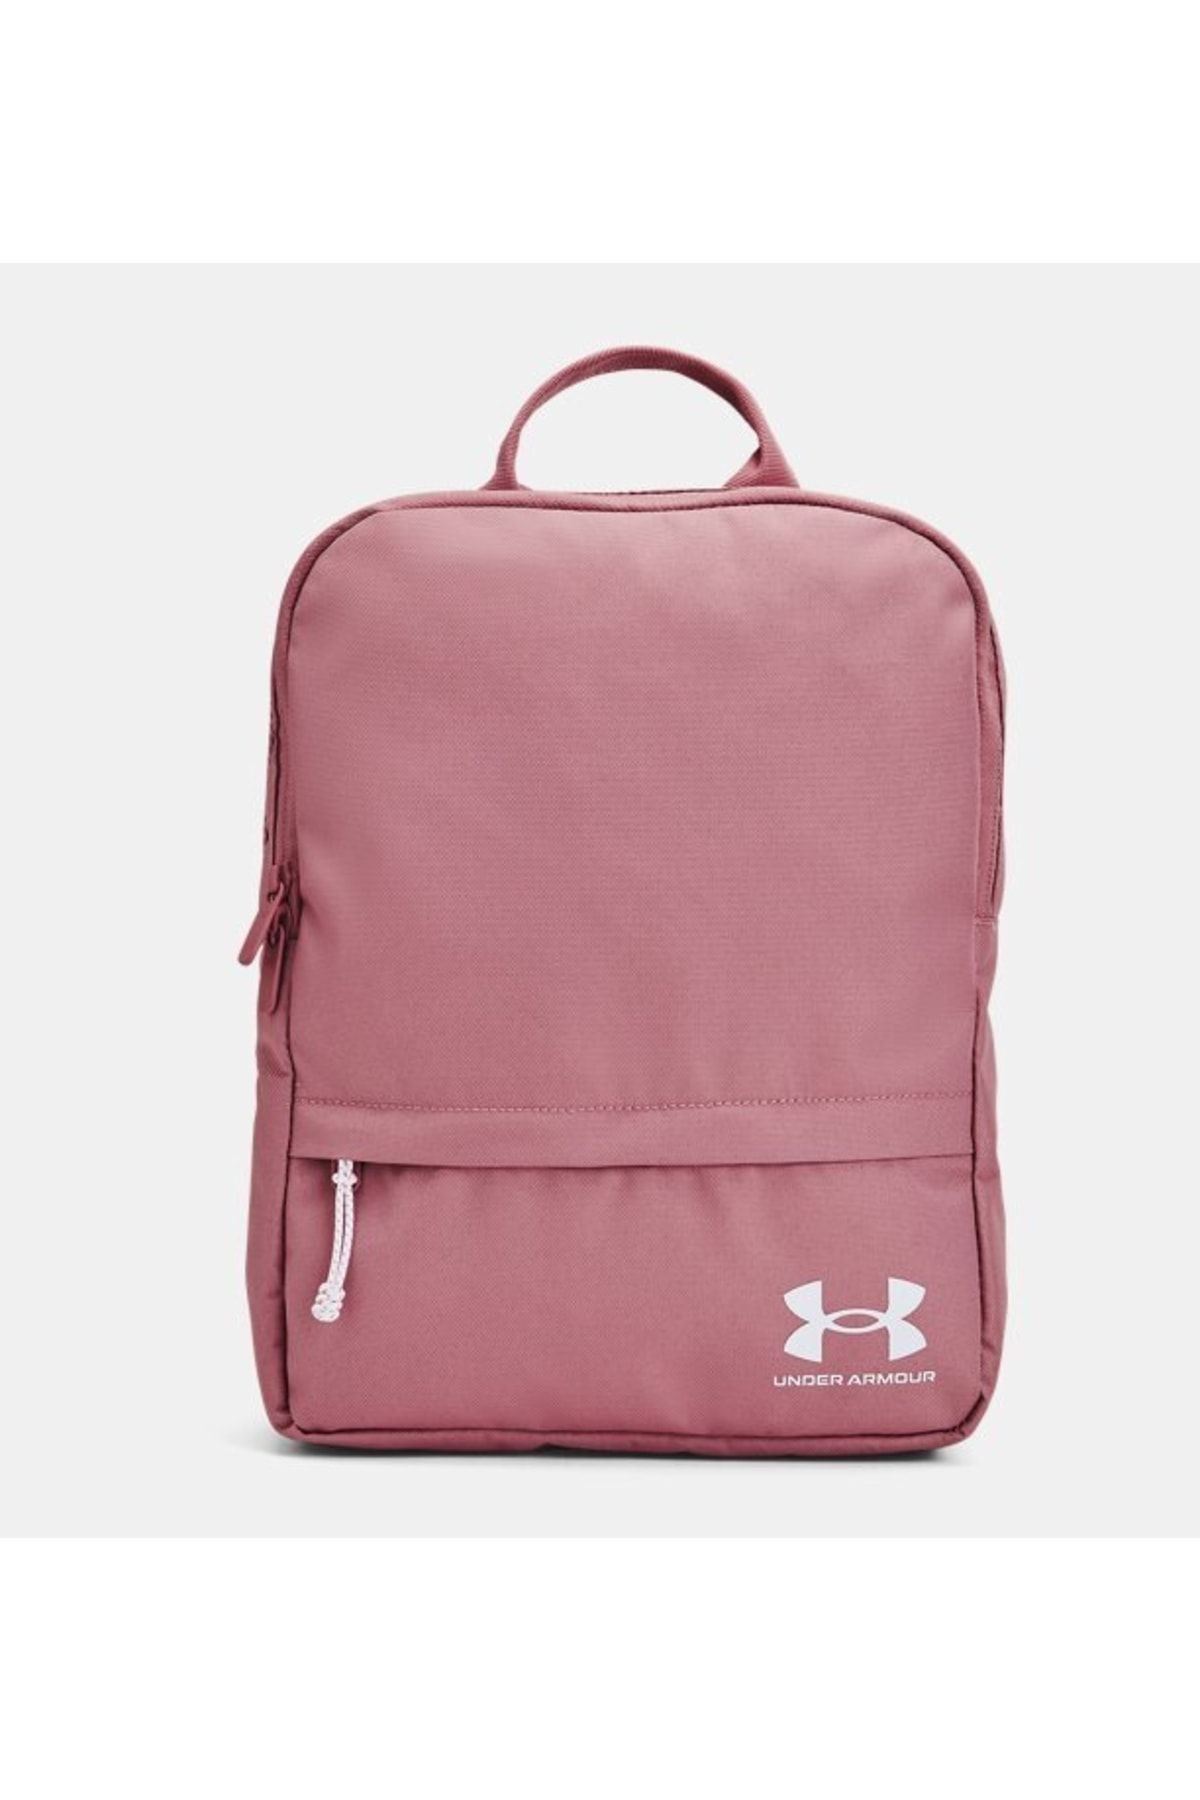 Under Armour Unisex Ua Loudon Backpack Small 1376456-697